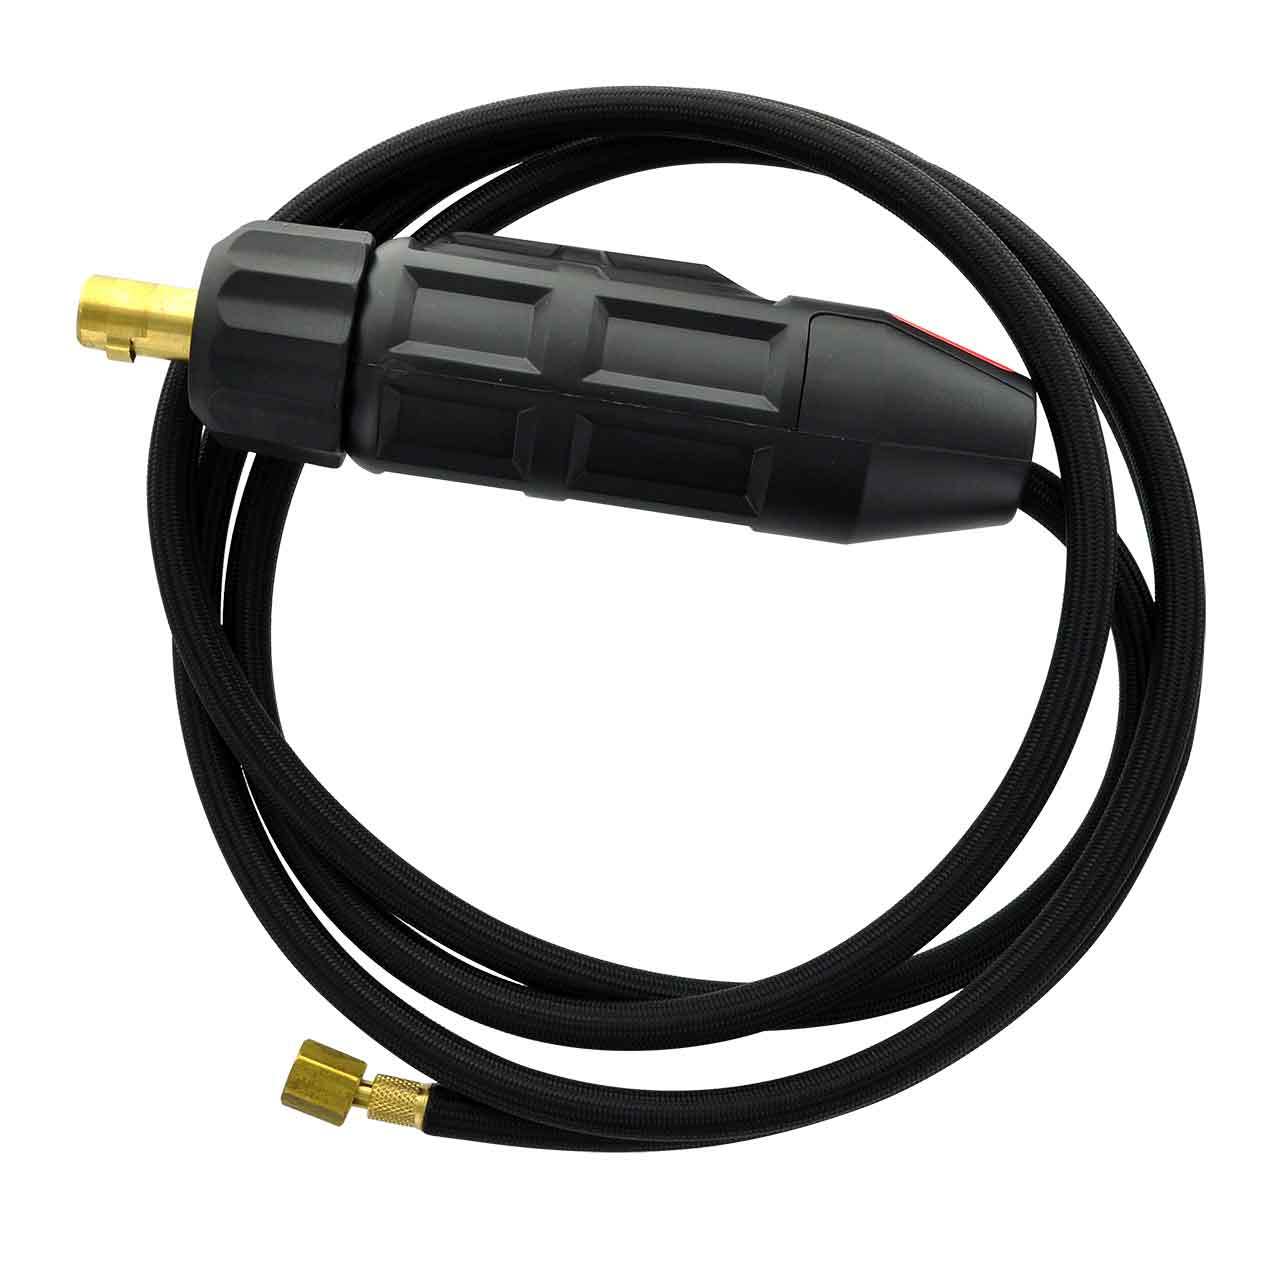 Shop CK Worldwide Gas-Cooled Dinse, TIG Cable Connectors | Canada